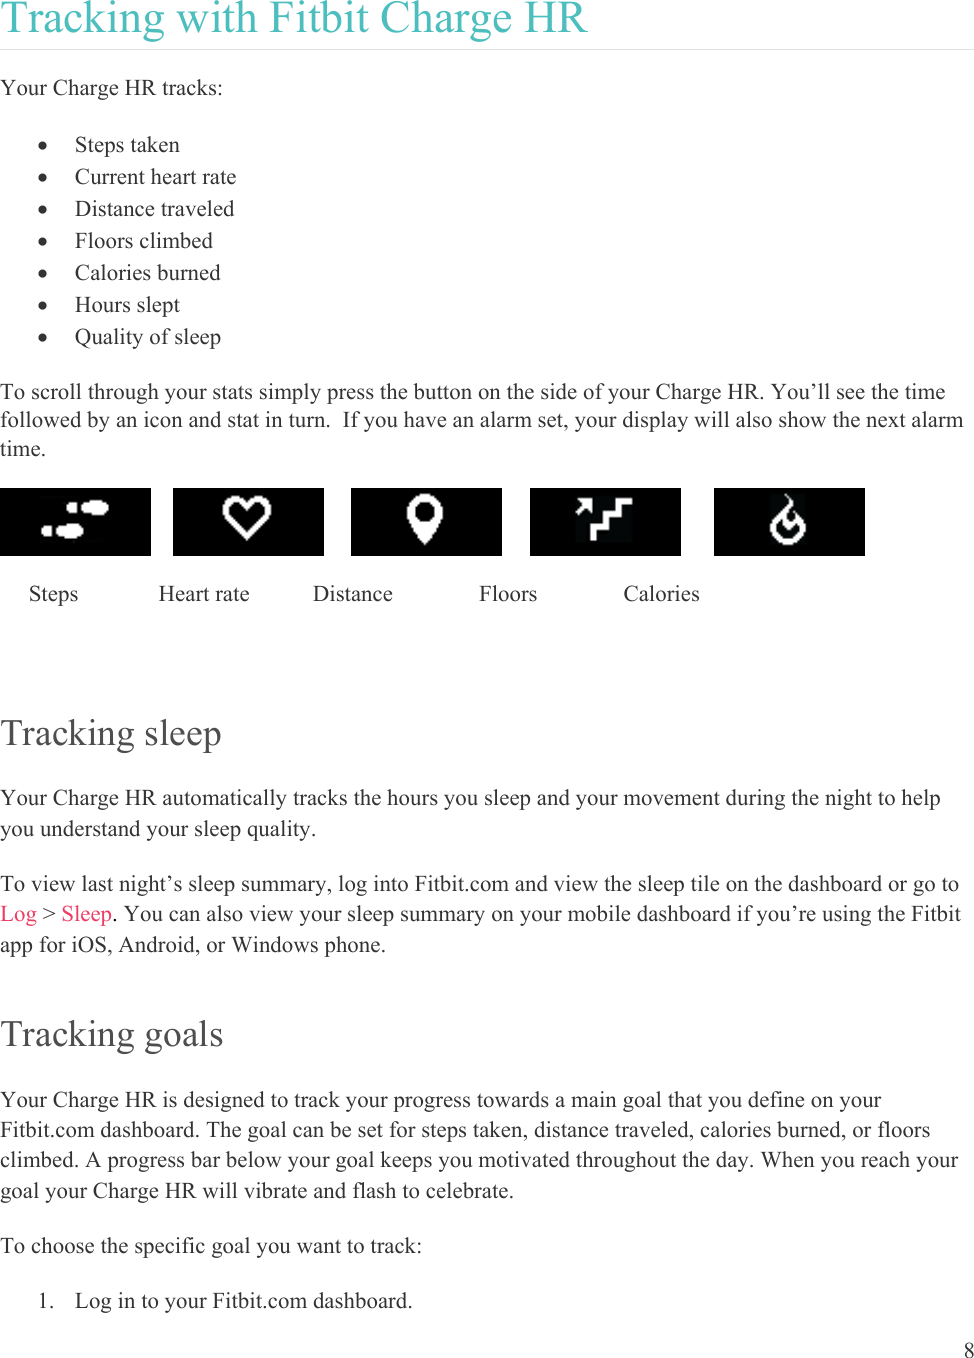 8  Tracking with Fitbit Charge HR Your Charge HR tracks:   Steps taken  Current heart rate  Distance traveled  Floors climbed  Calories burned  Hours slept  Quality of sleep To scroll through your stats simply press the button on the side of your Charge HR. You’ll see the time followed by an icon and stat in turn.  If you have an alarm set, your display will also show the next alarm time.                                Steps              Heart rate           Distance               Floors               Calories        Tracking sleep  Your Charge HR automatically tracks the hours you sleep and your movement during the night to help you understand your sleep quality.  To view last night’s sleep summary, log into Fitbit.com and view the sleep tile on the dashboard or go to Log &gt; Sleep. You can also view your sleep summary on your mobile dashboard if you’re using the Fitbit app for iOS, Android, or Windows phone. Tracking goals  Your Charge HR is designed to track your progress towards a main goal that you define on your Fitbit.com dashboard. The goal can be set for steps taken, distance traveled, calories burned, or floors climbed. A progress bar below your goal keeps you motivated throughout the day. When you reach your goal your Charge HR will vibrate and flash to celebrate.  To choose the specific goal you want to track:  1. Log in to your Fitbit.com dashboard.  